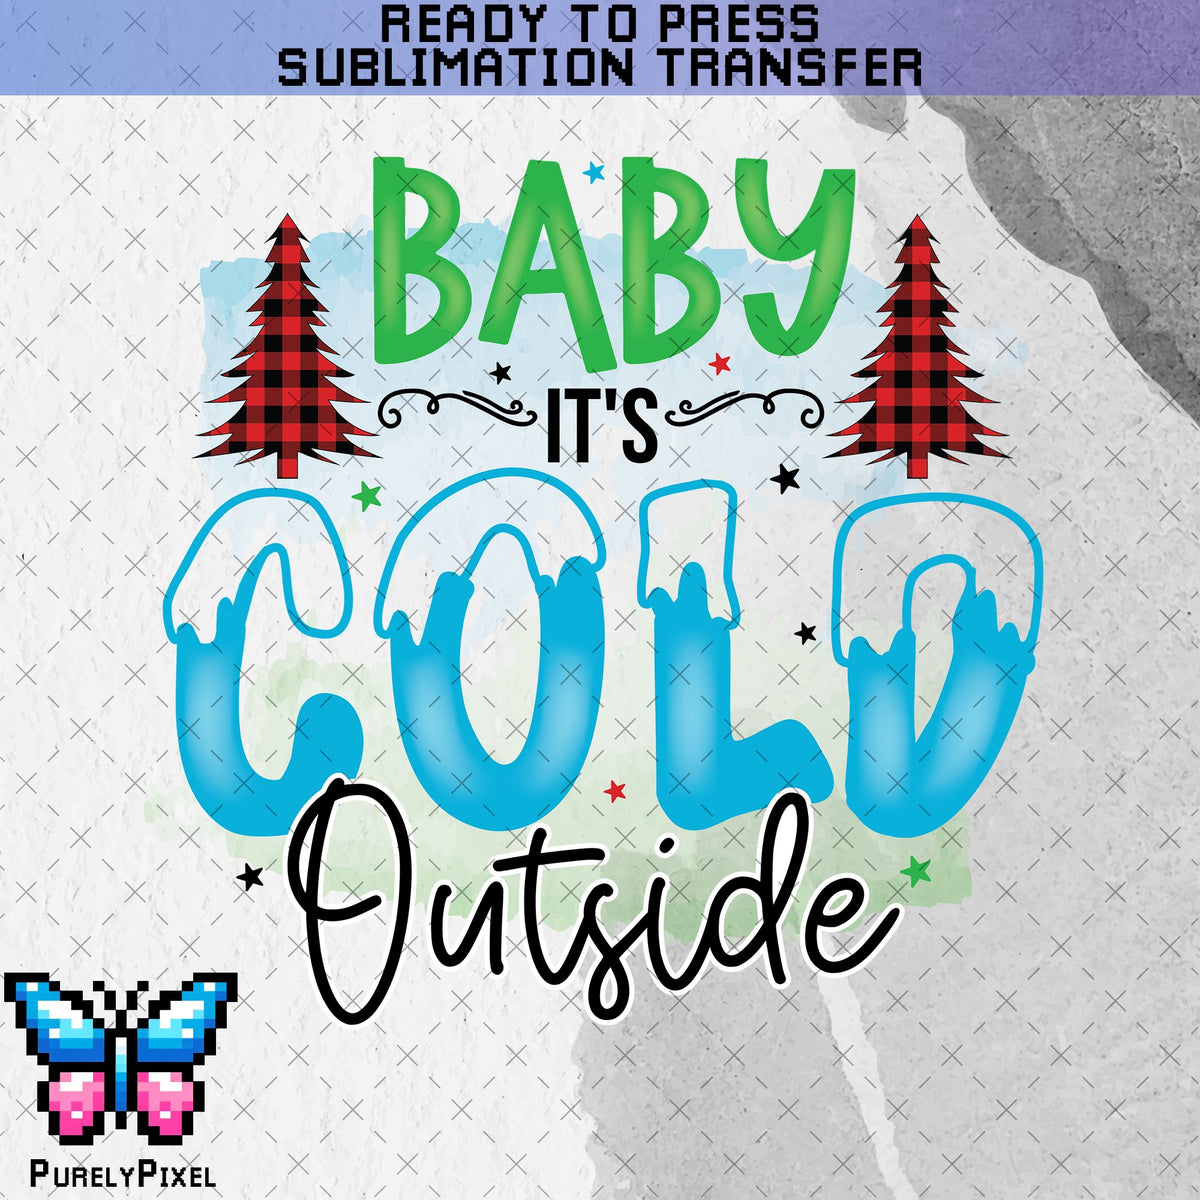 Baby It's Cold Outside Sub Transfer | Winter and Christmas Ice and Snow with Trees | Ready to Press Sublimation Transfer | PurelyPixels | Sublimation Transfers